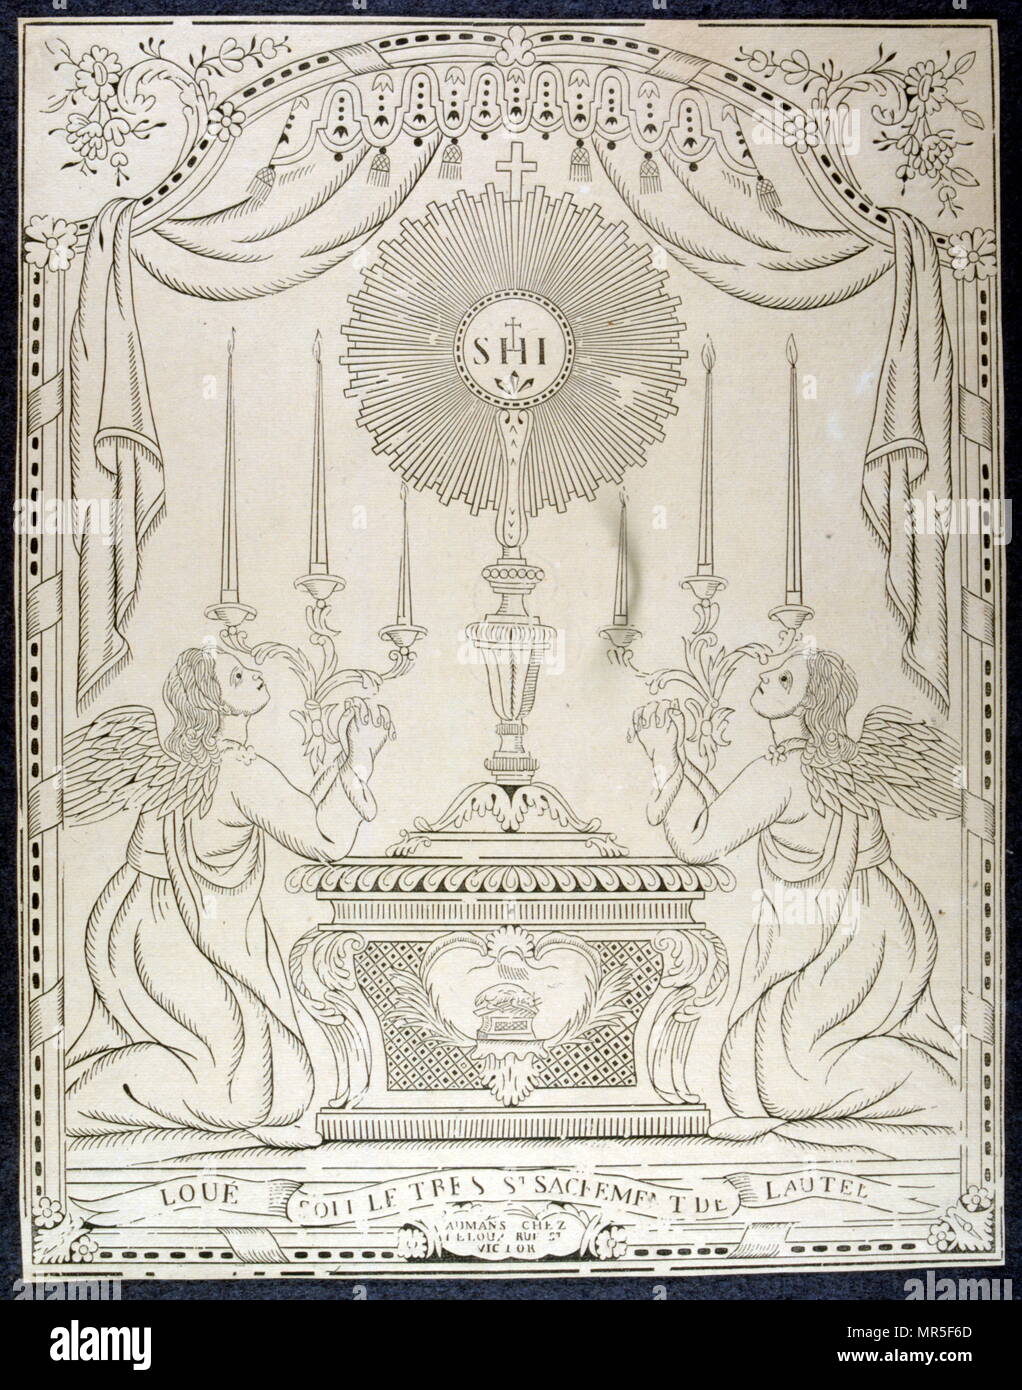 French 19th century woodcut illustration showing the Holy Sacrament at the high altar of a church Stock Photo